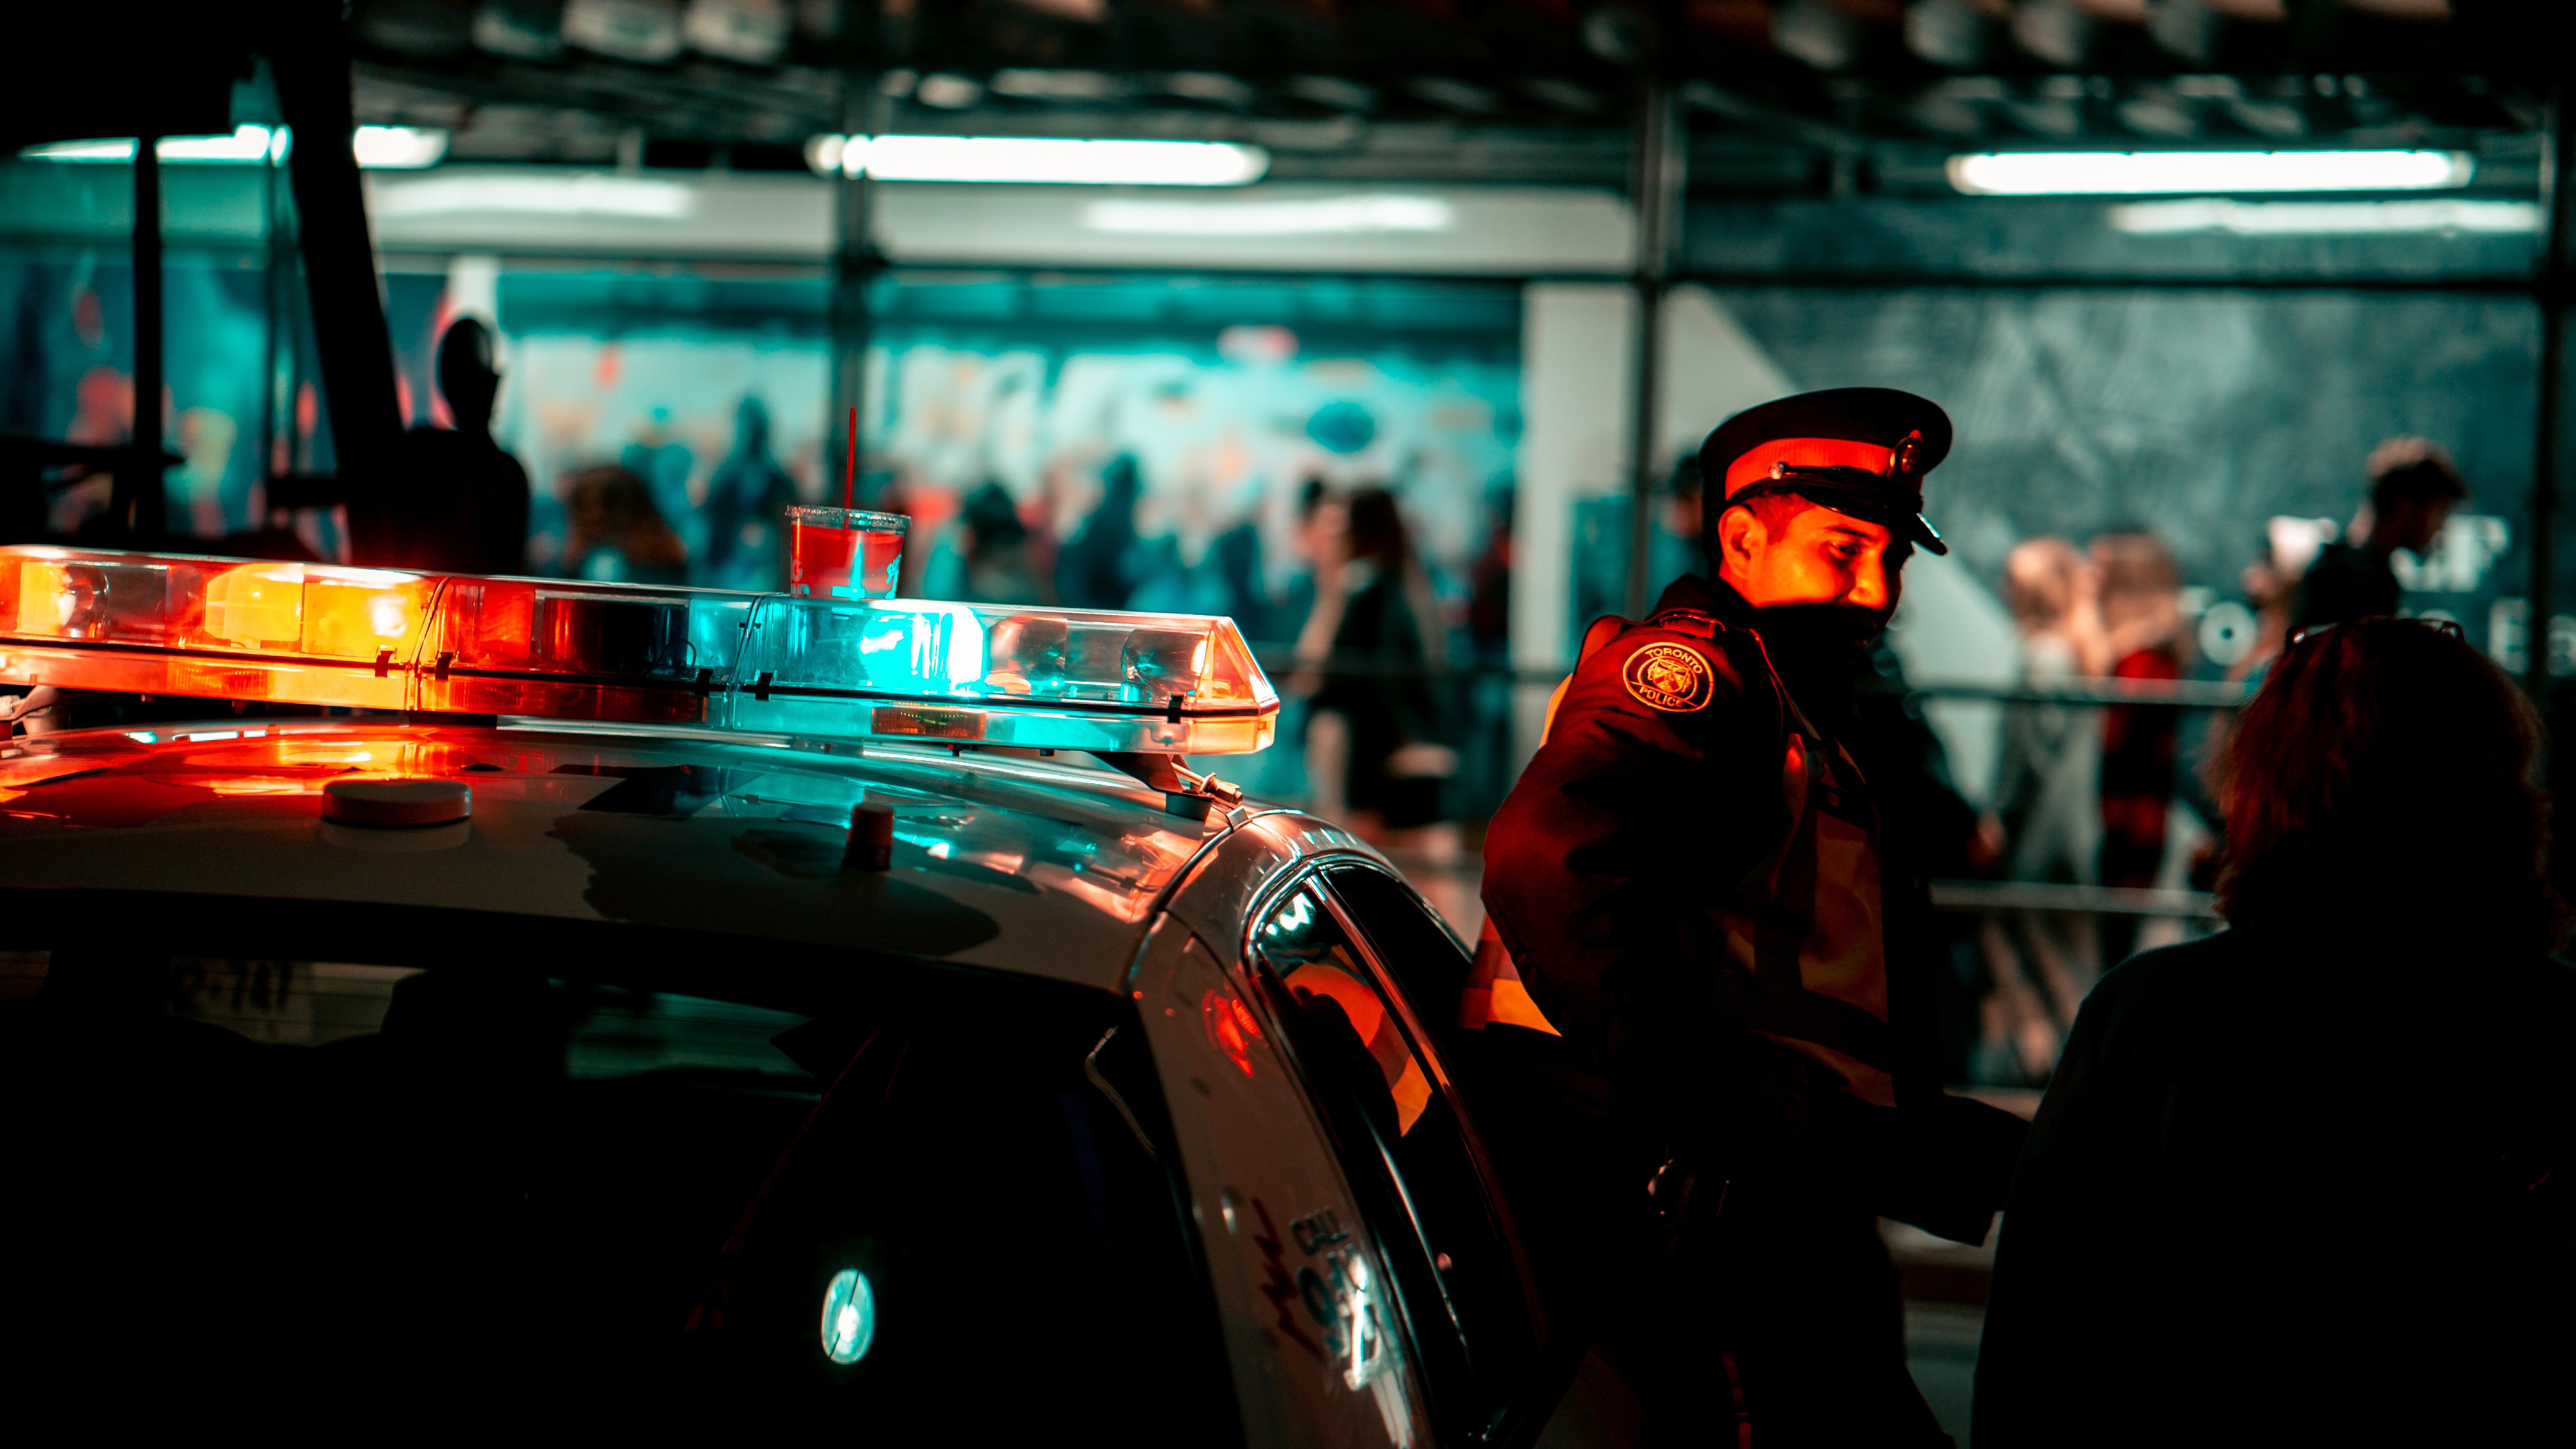 Pictured - An image of a police officer in uniform standing next to a police vehicle with siren lights on | Source: Pexels 